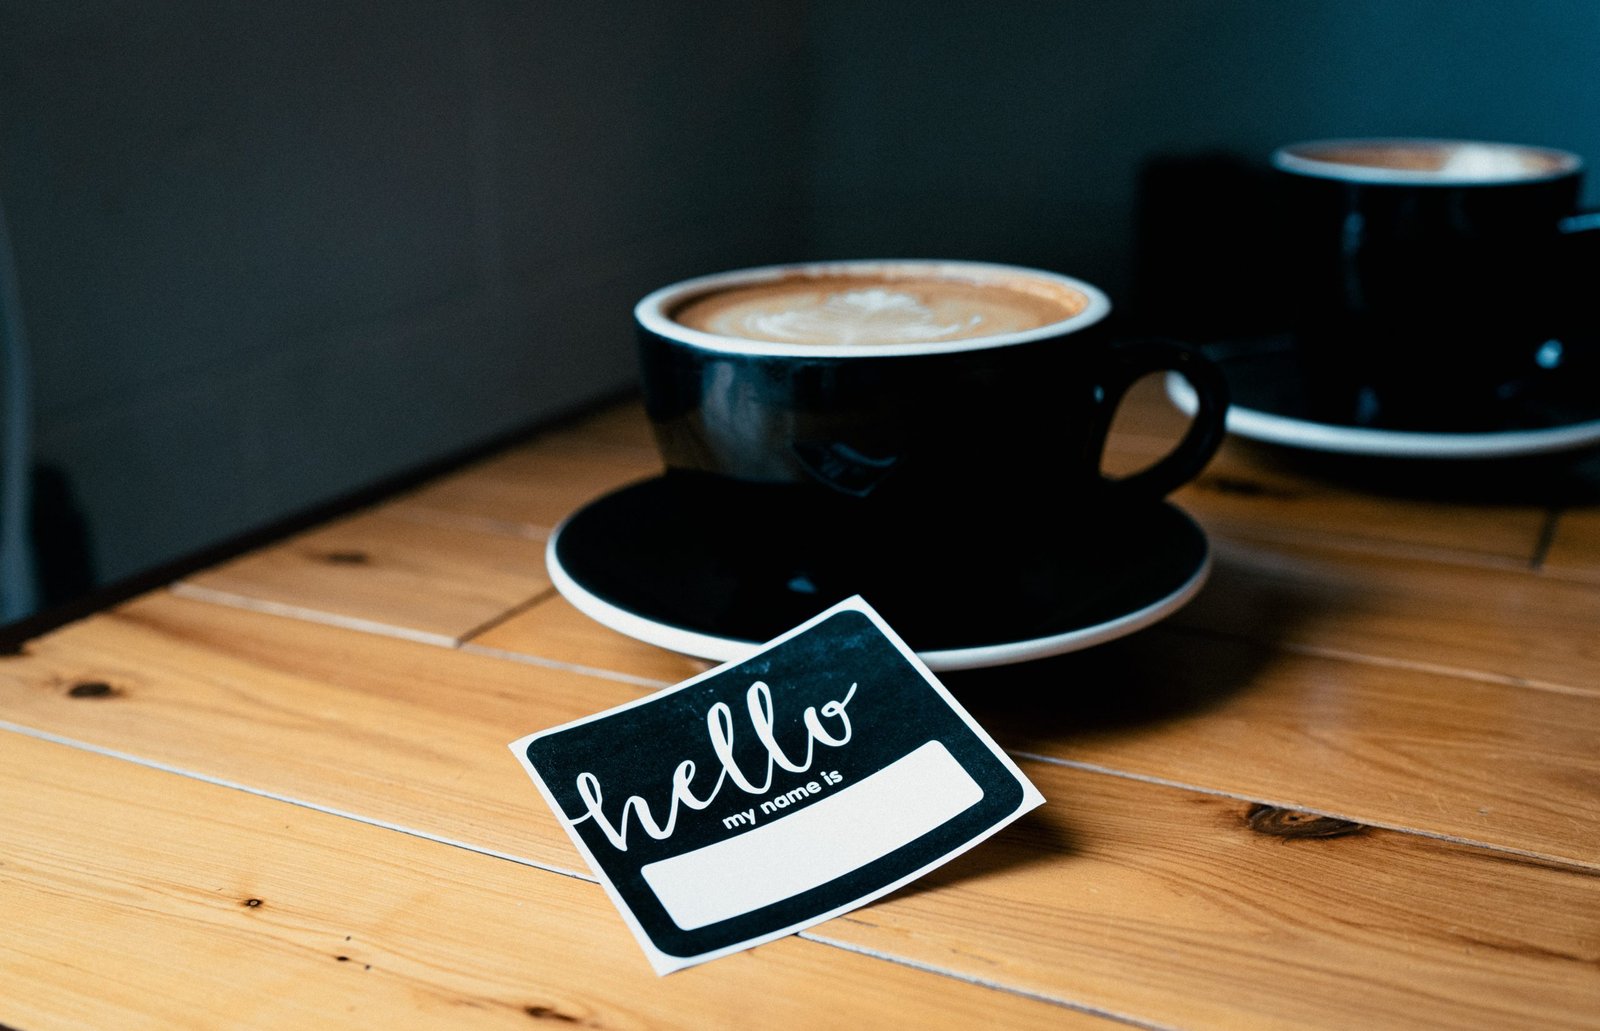 impressum and introduce yourself with a hello